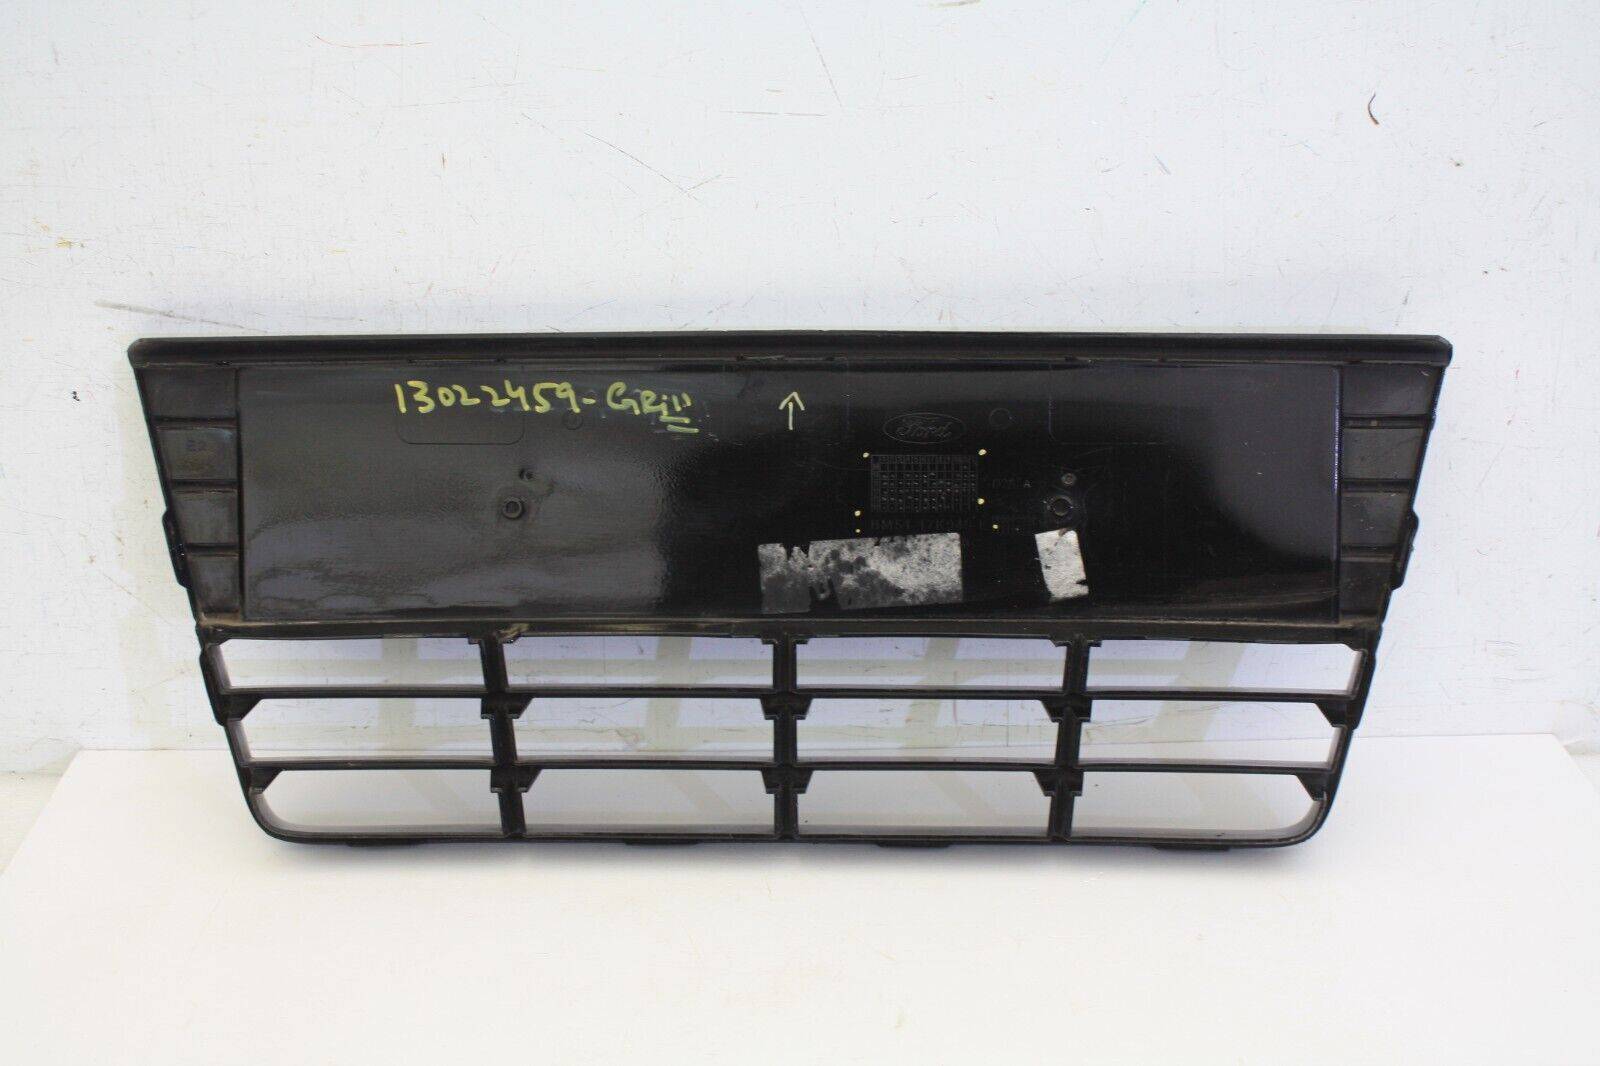 Ford-Focus-Front-Bumper-Grill-2011-TO-2014-BM51-17K945-E-Genuine-SEE-PICS-176238481574-10